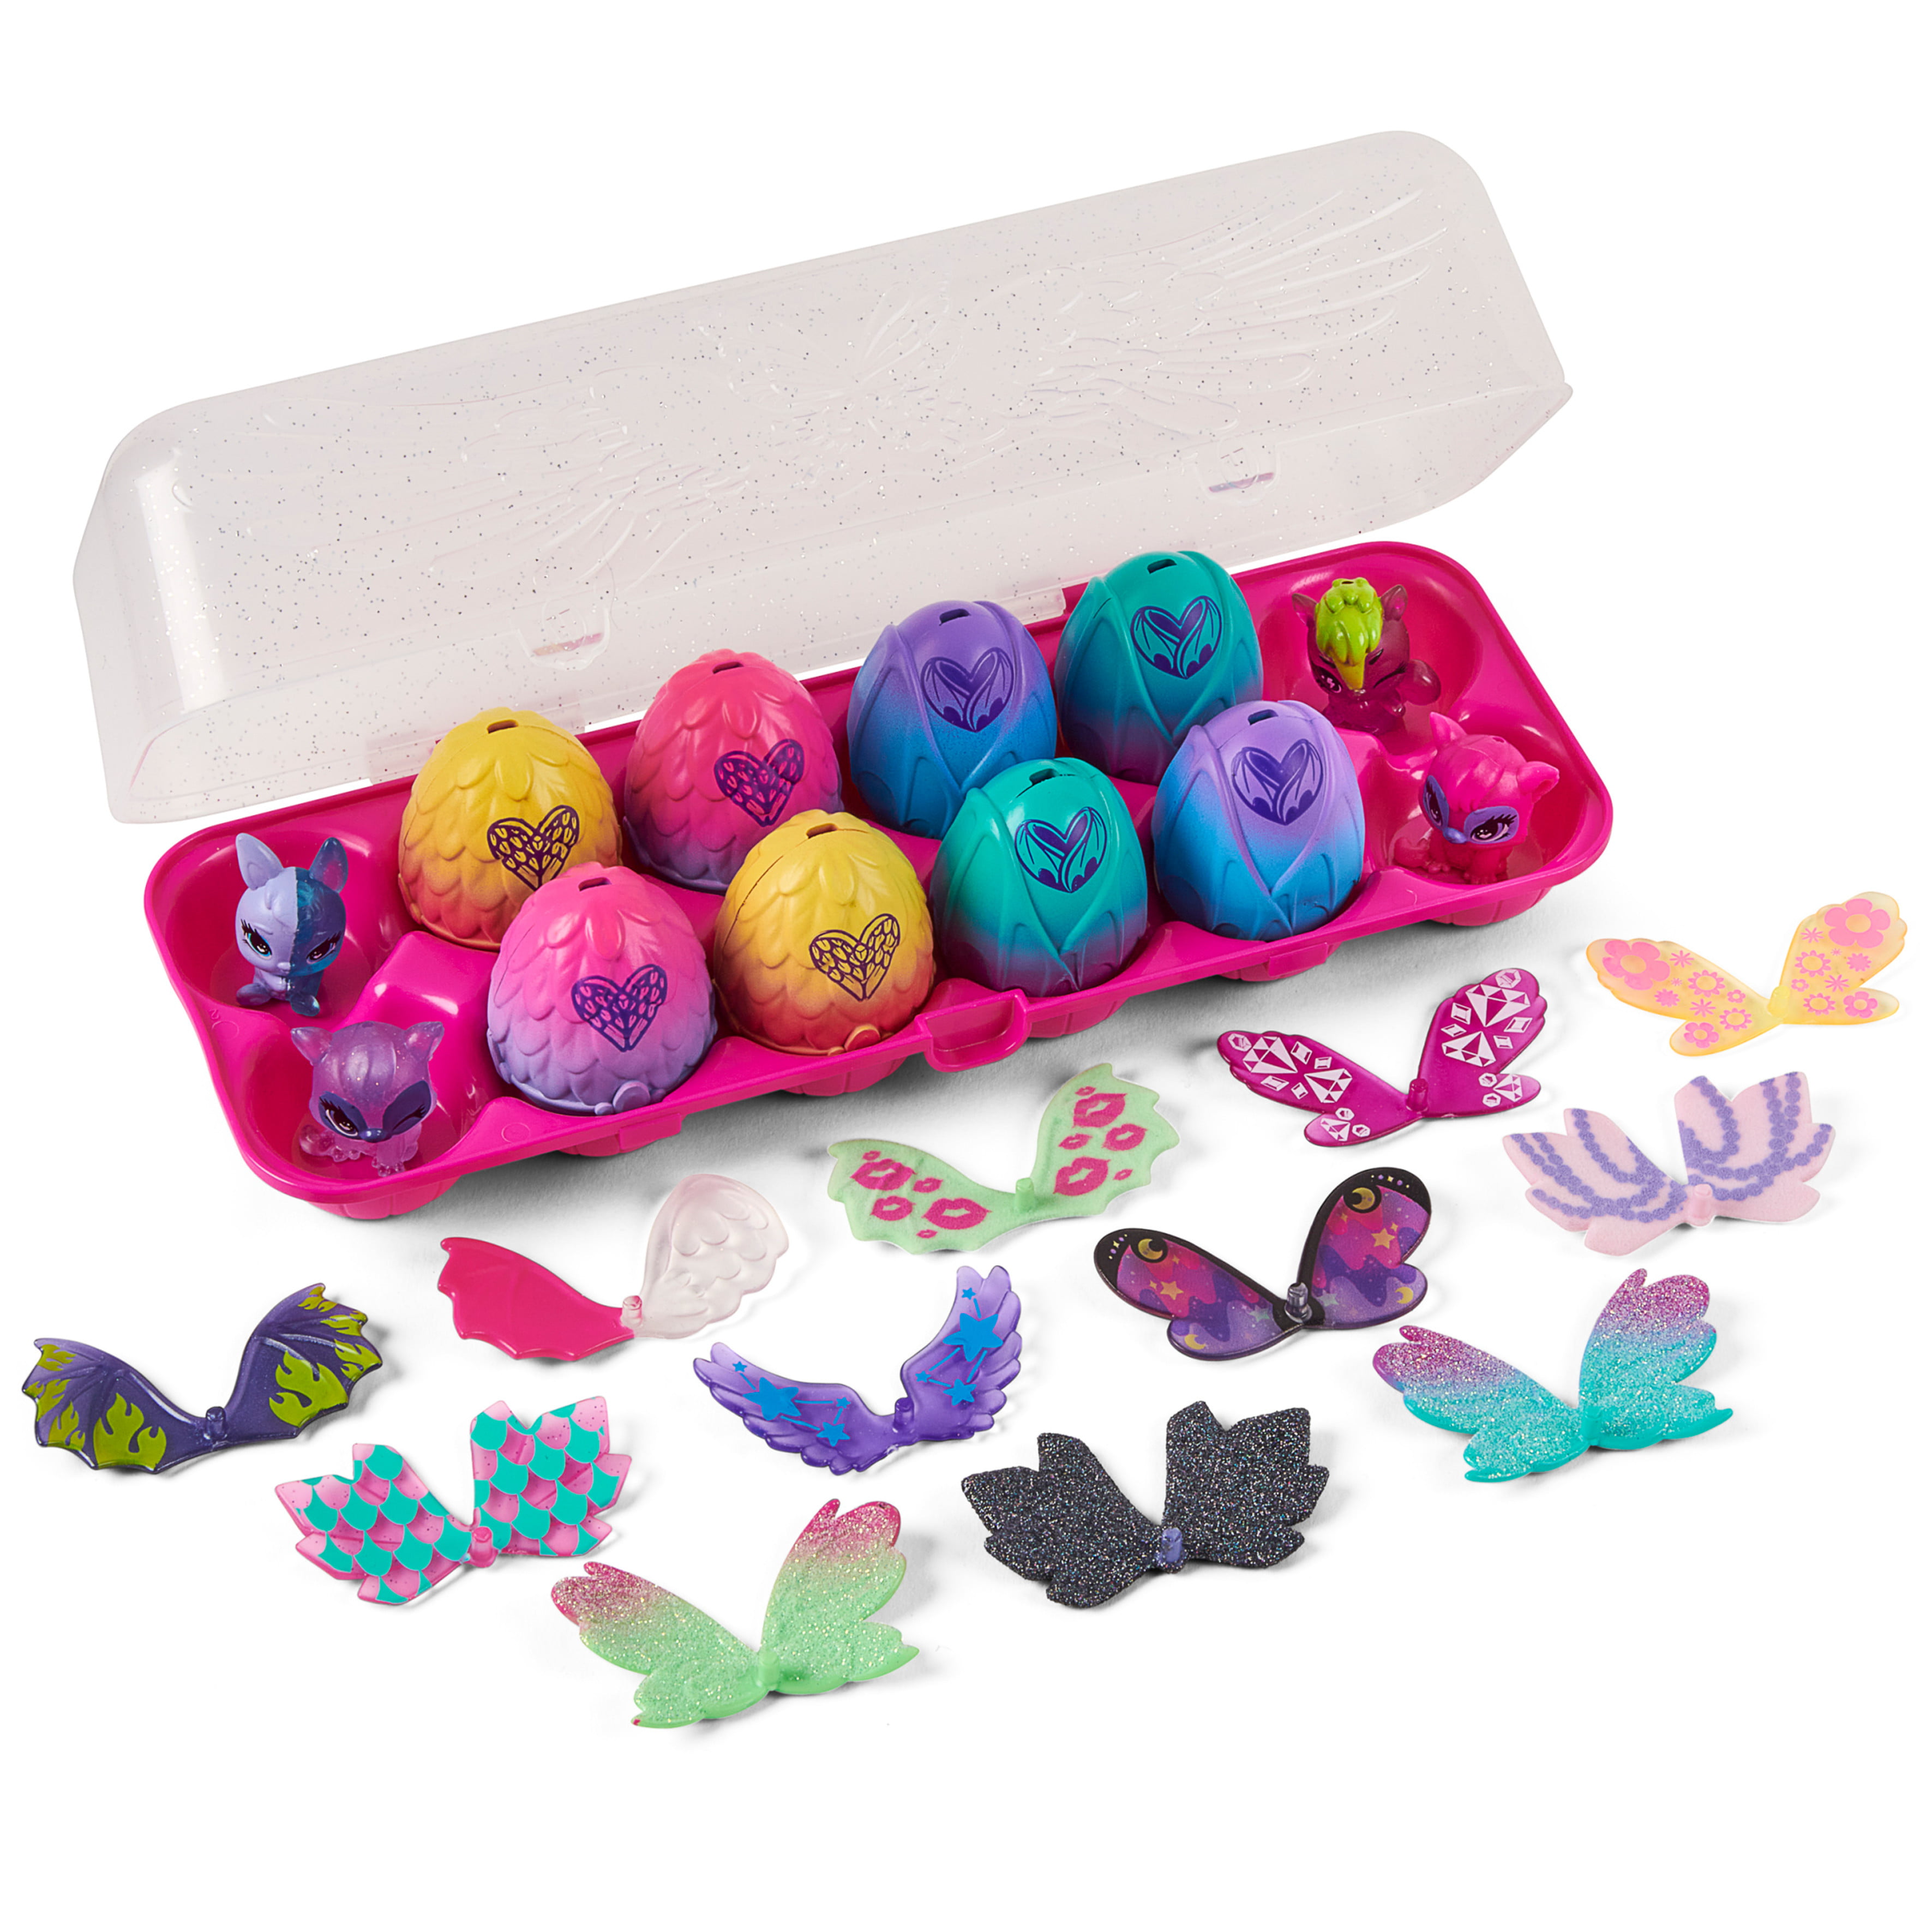 Hatchimals Colleggtibles Cosmic Candy Limited Edition Secret Snacks 12-pack for sale online 